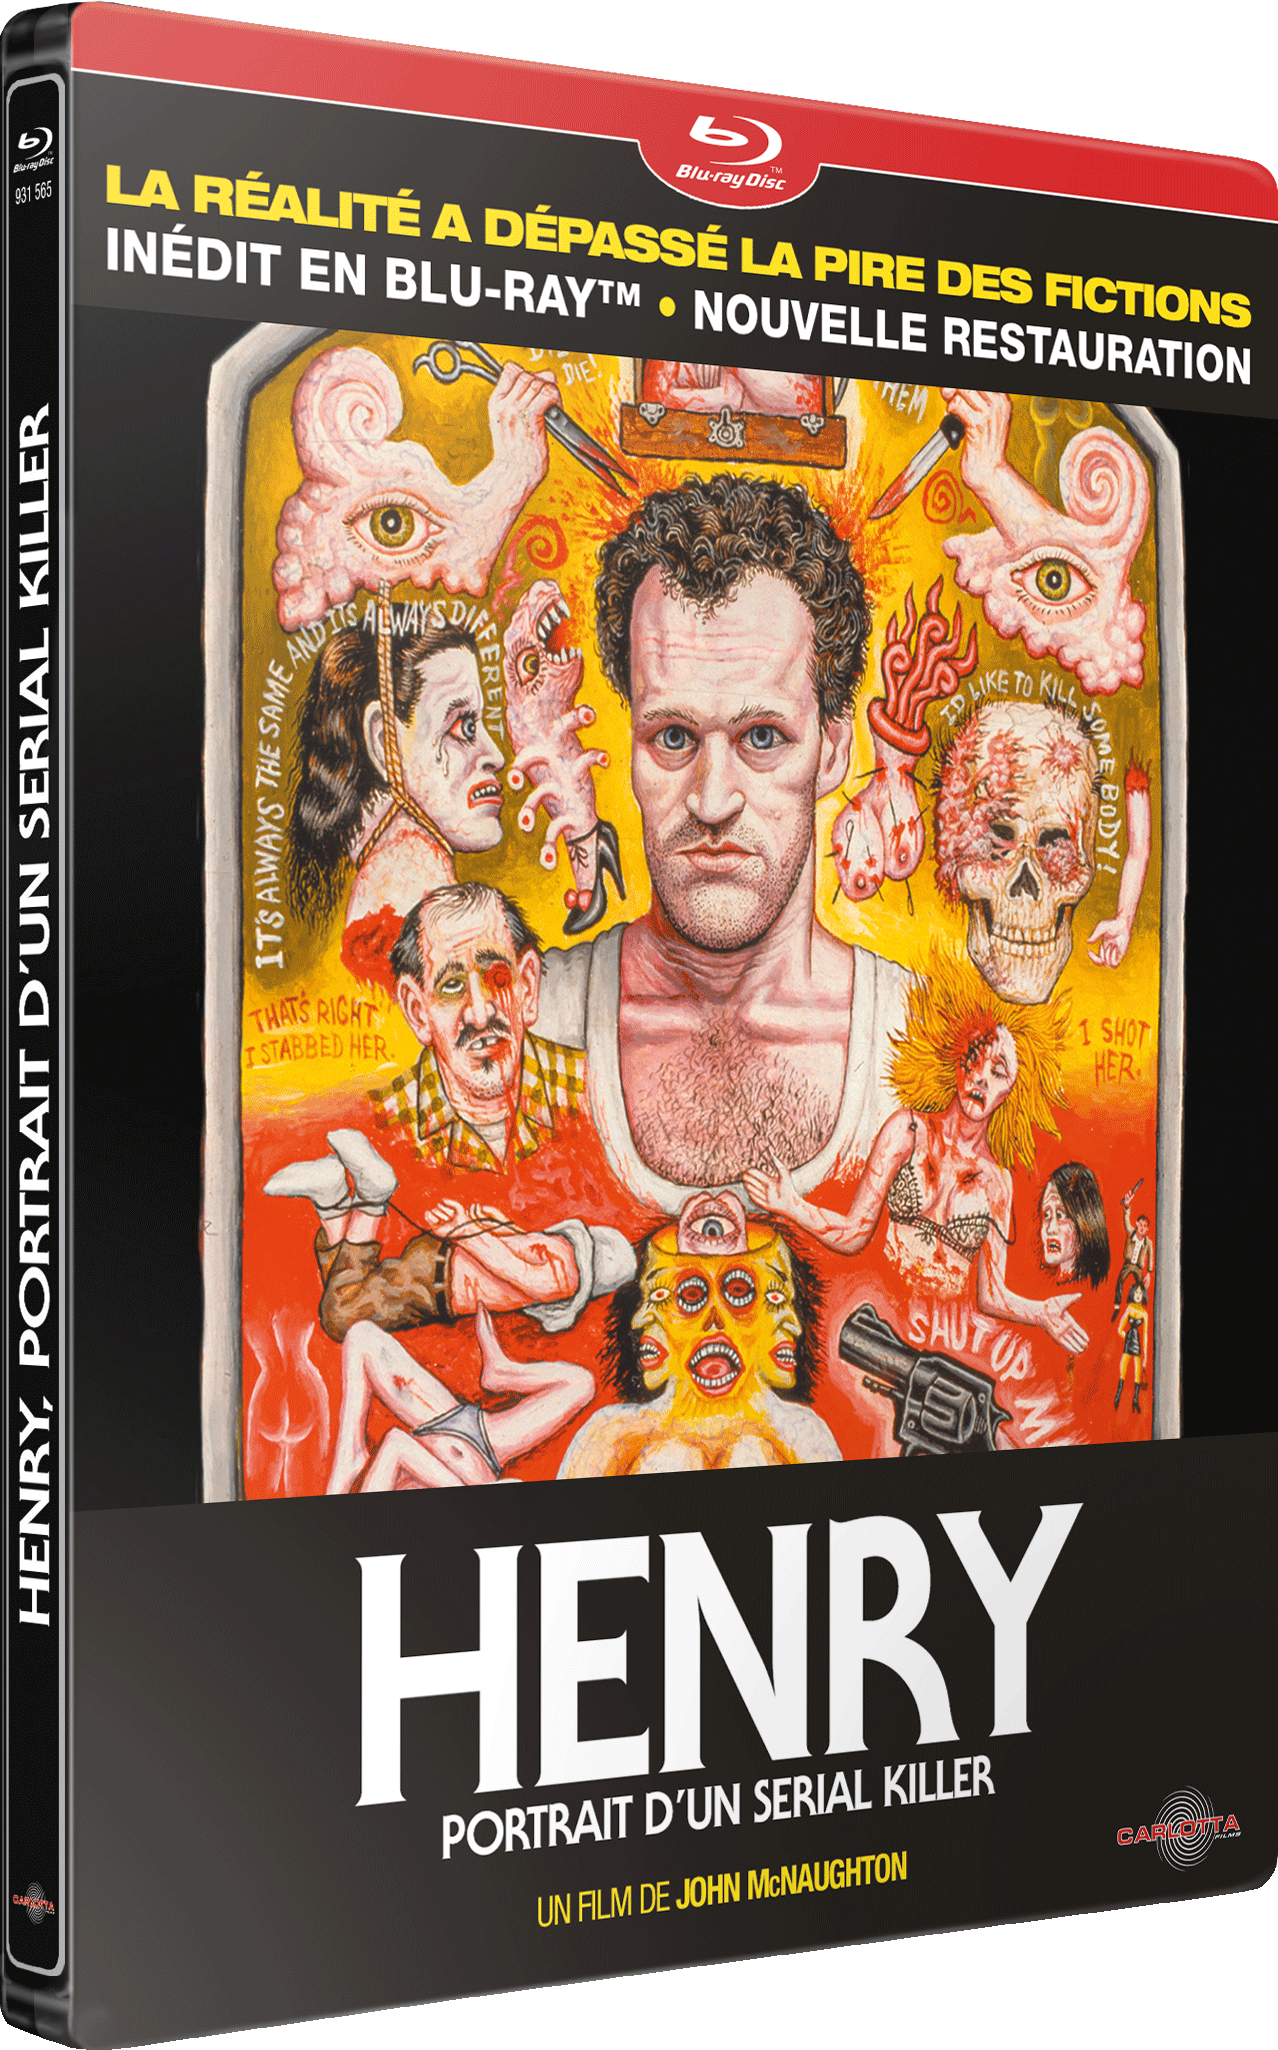 Pack Henry La Totale - Blu-ray + Affiche + T-Shirt